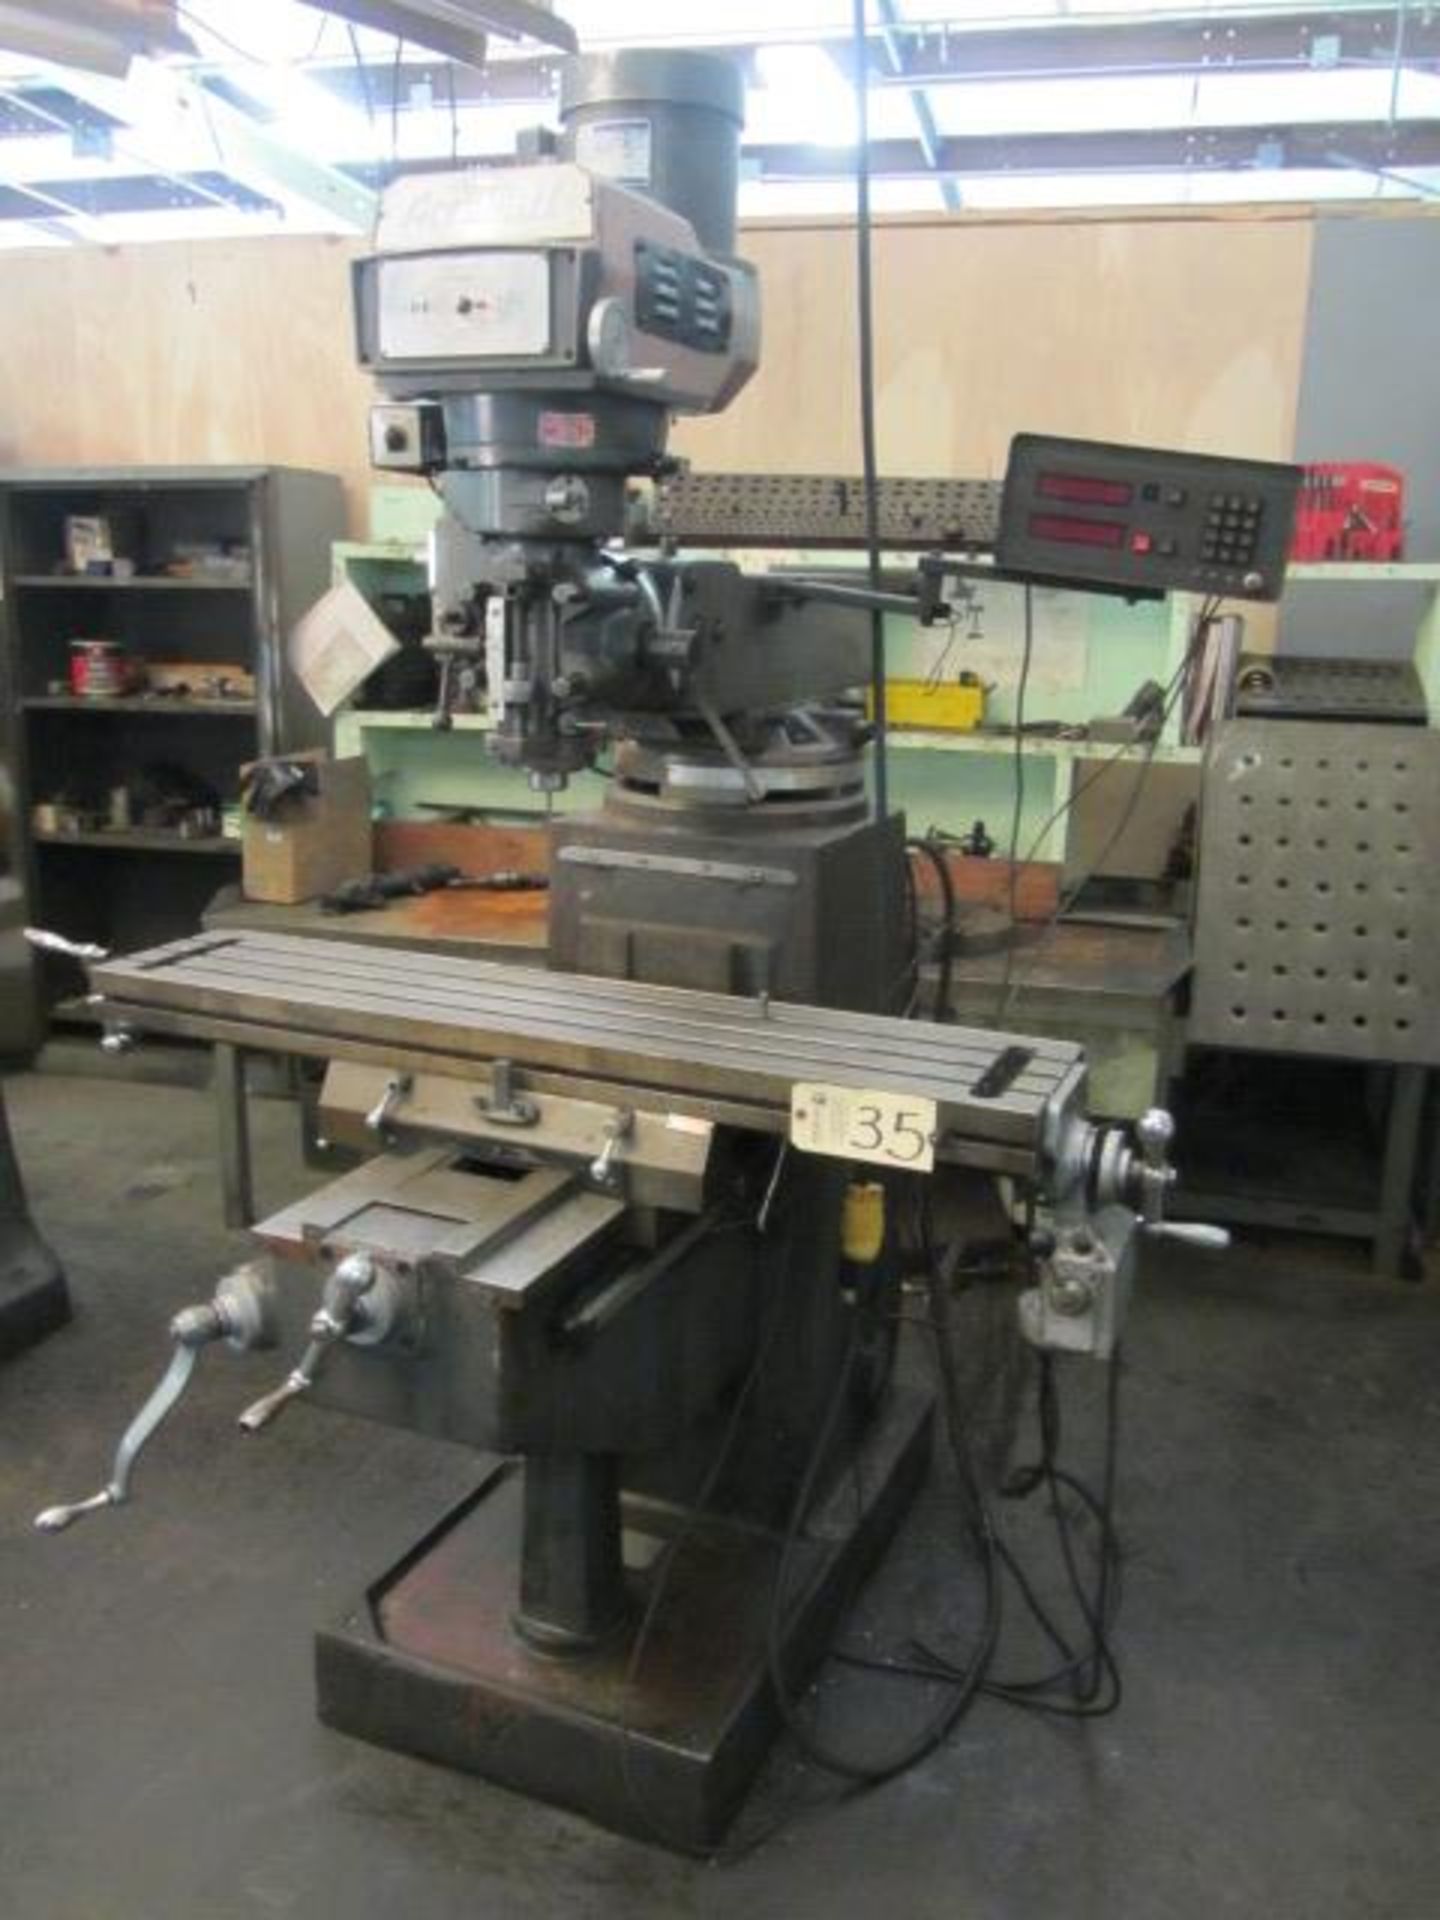 Acra Variable Speed Vertical Milling Machine with 10'' x 50'' Table, R-8 Variable Spindle Speeds - Bild 2 aus 6